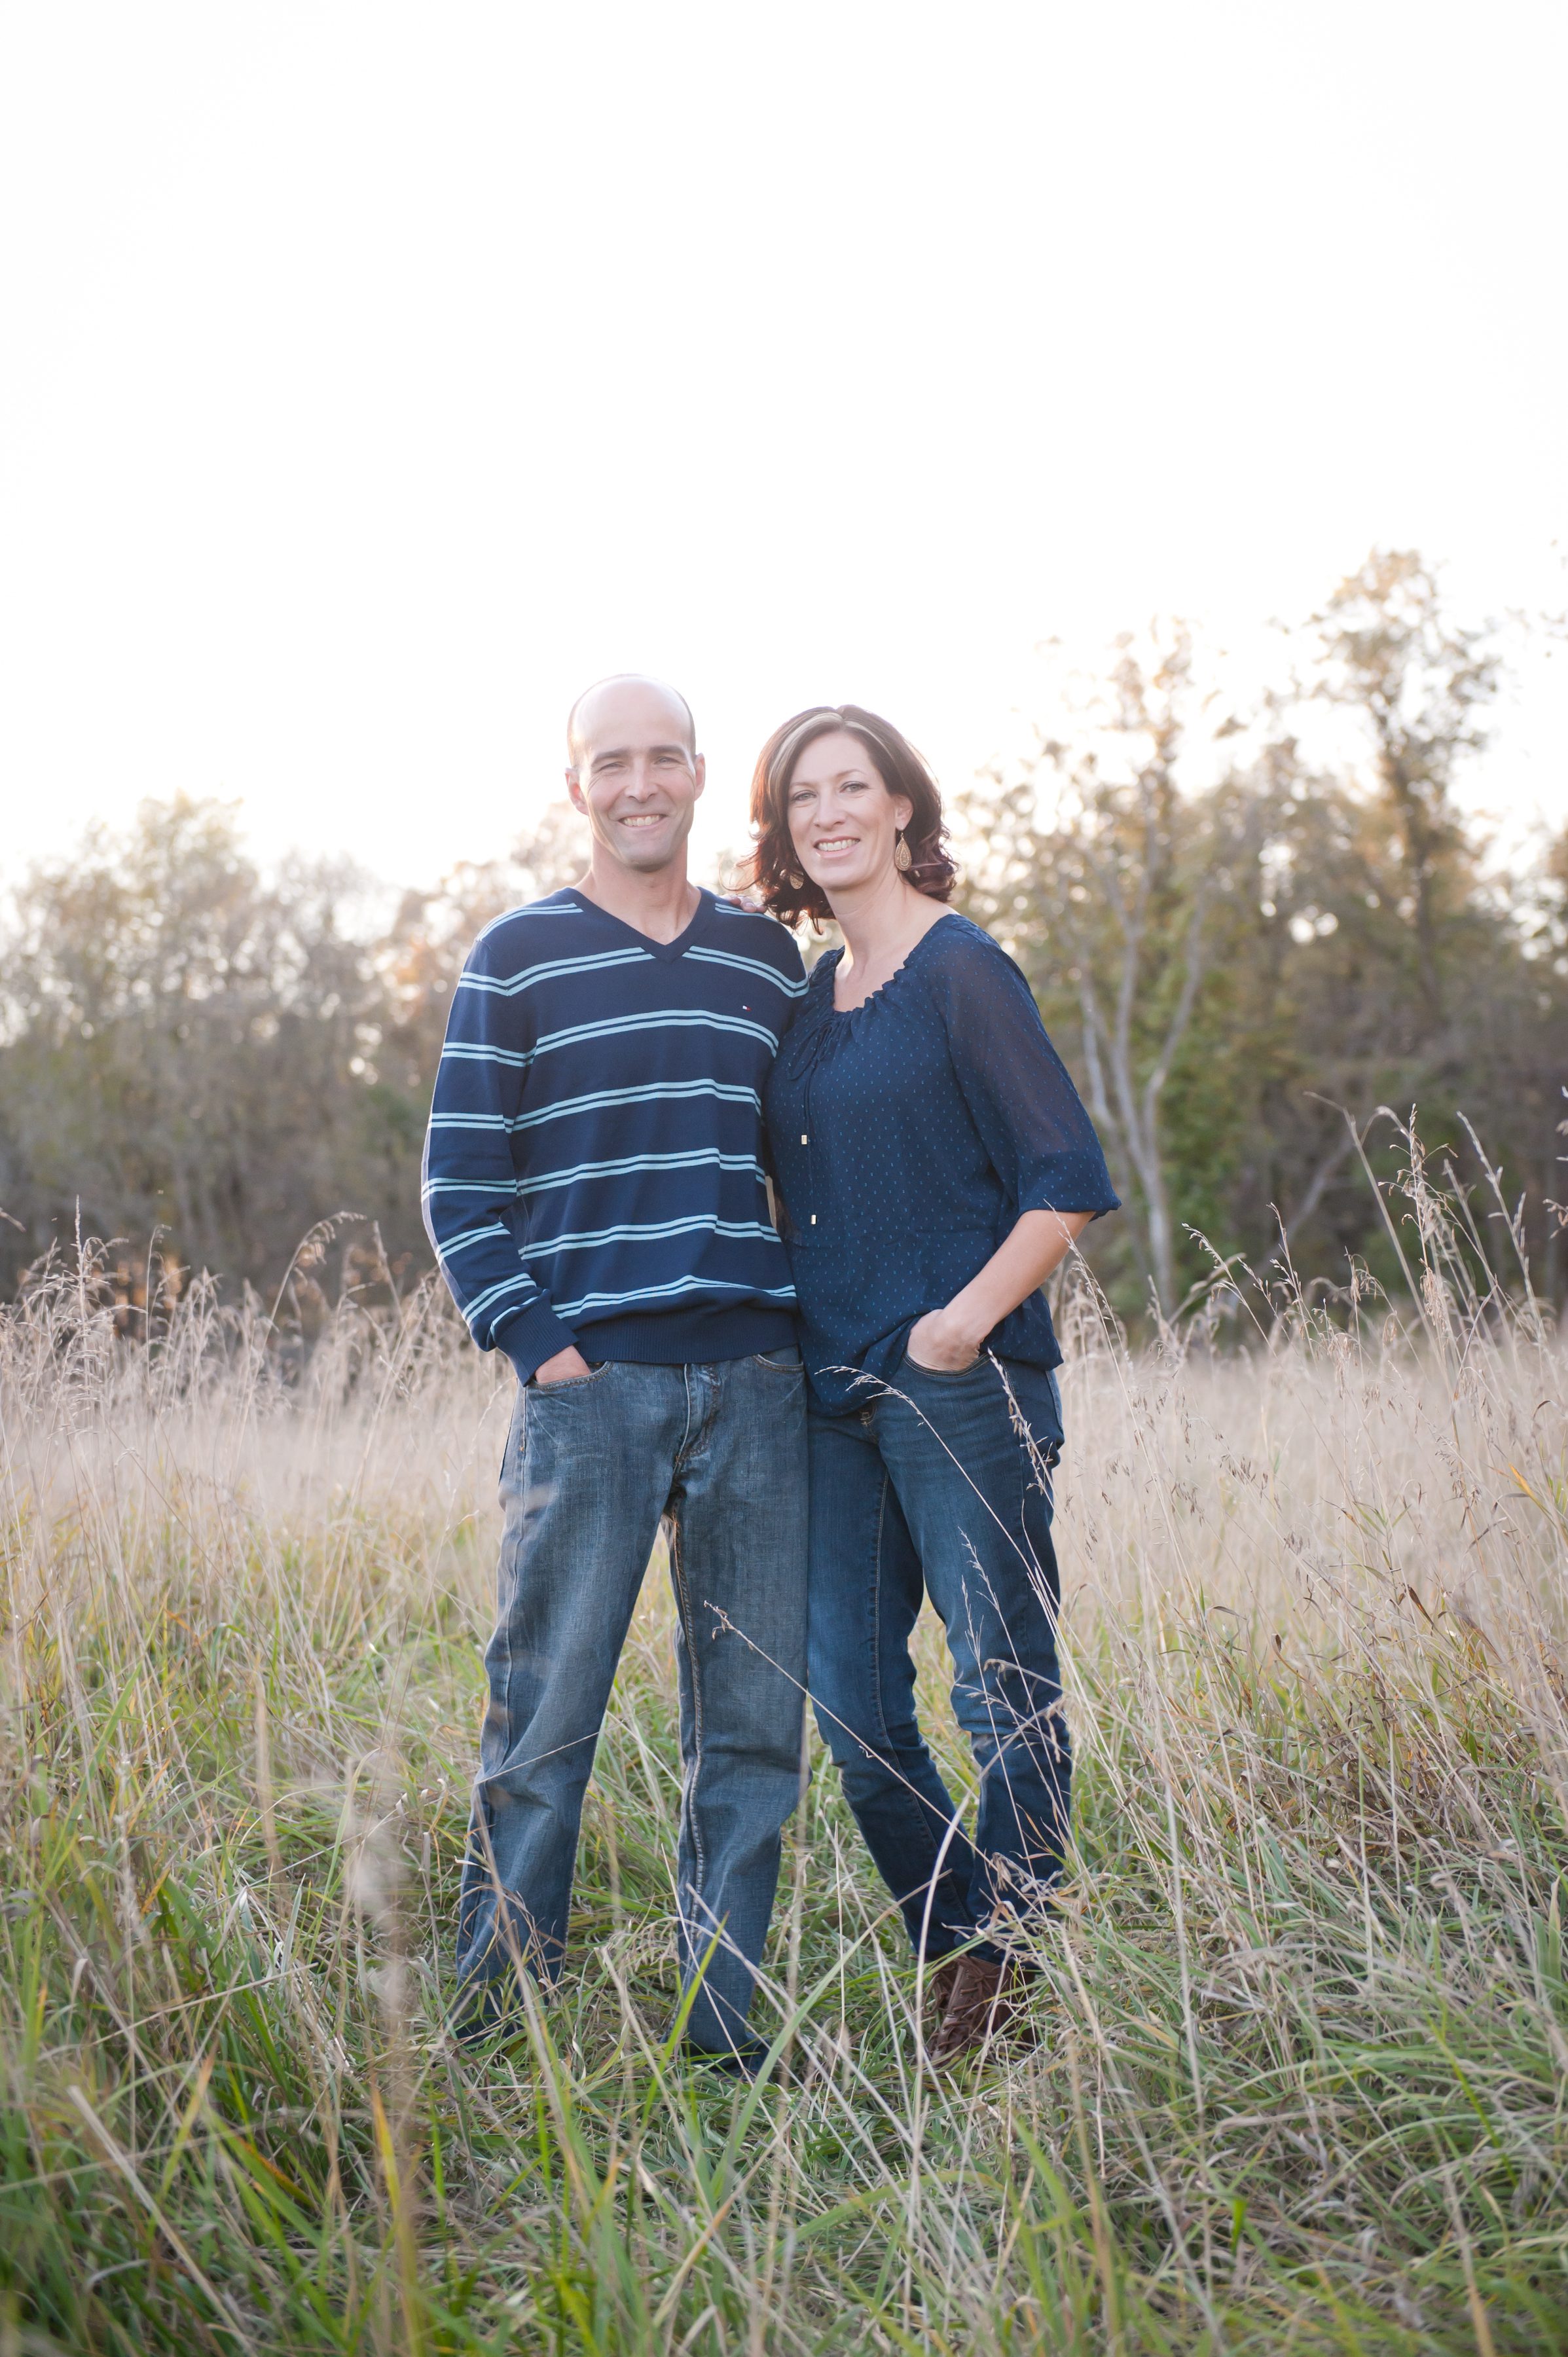 Craig and Colleen Riddell